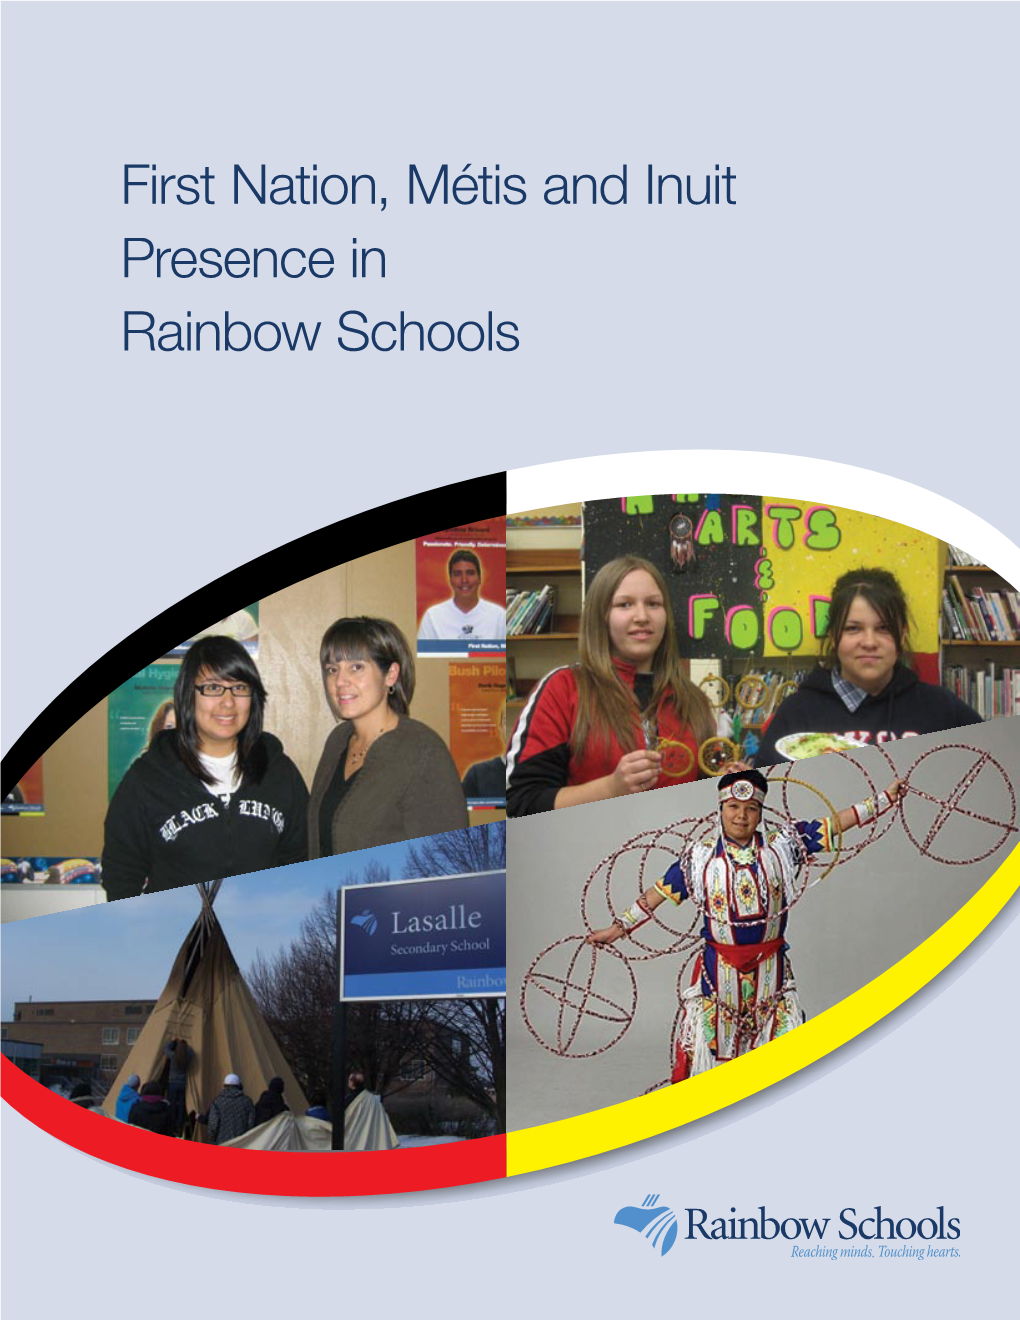 First Nation, Métis and Inuit Presence in Rainbow Schools Contents